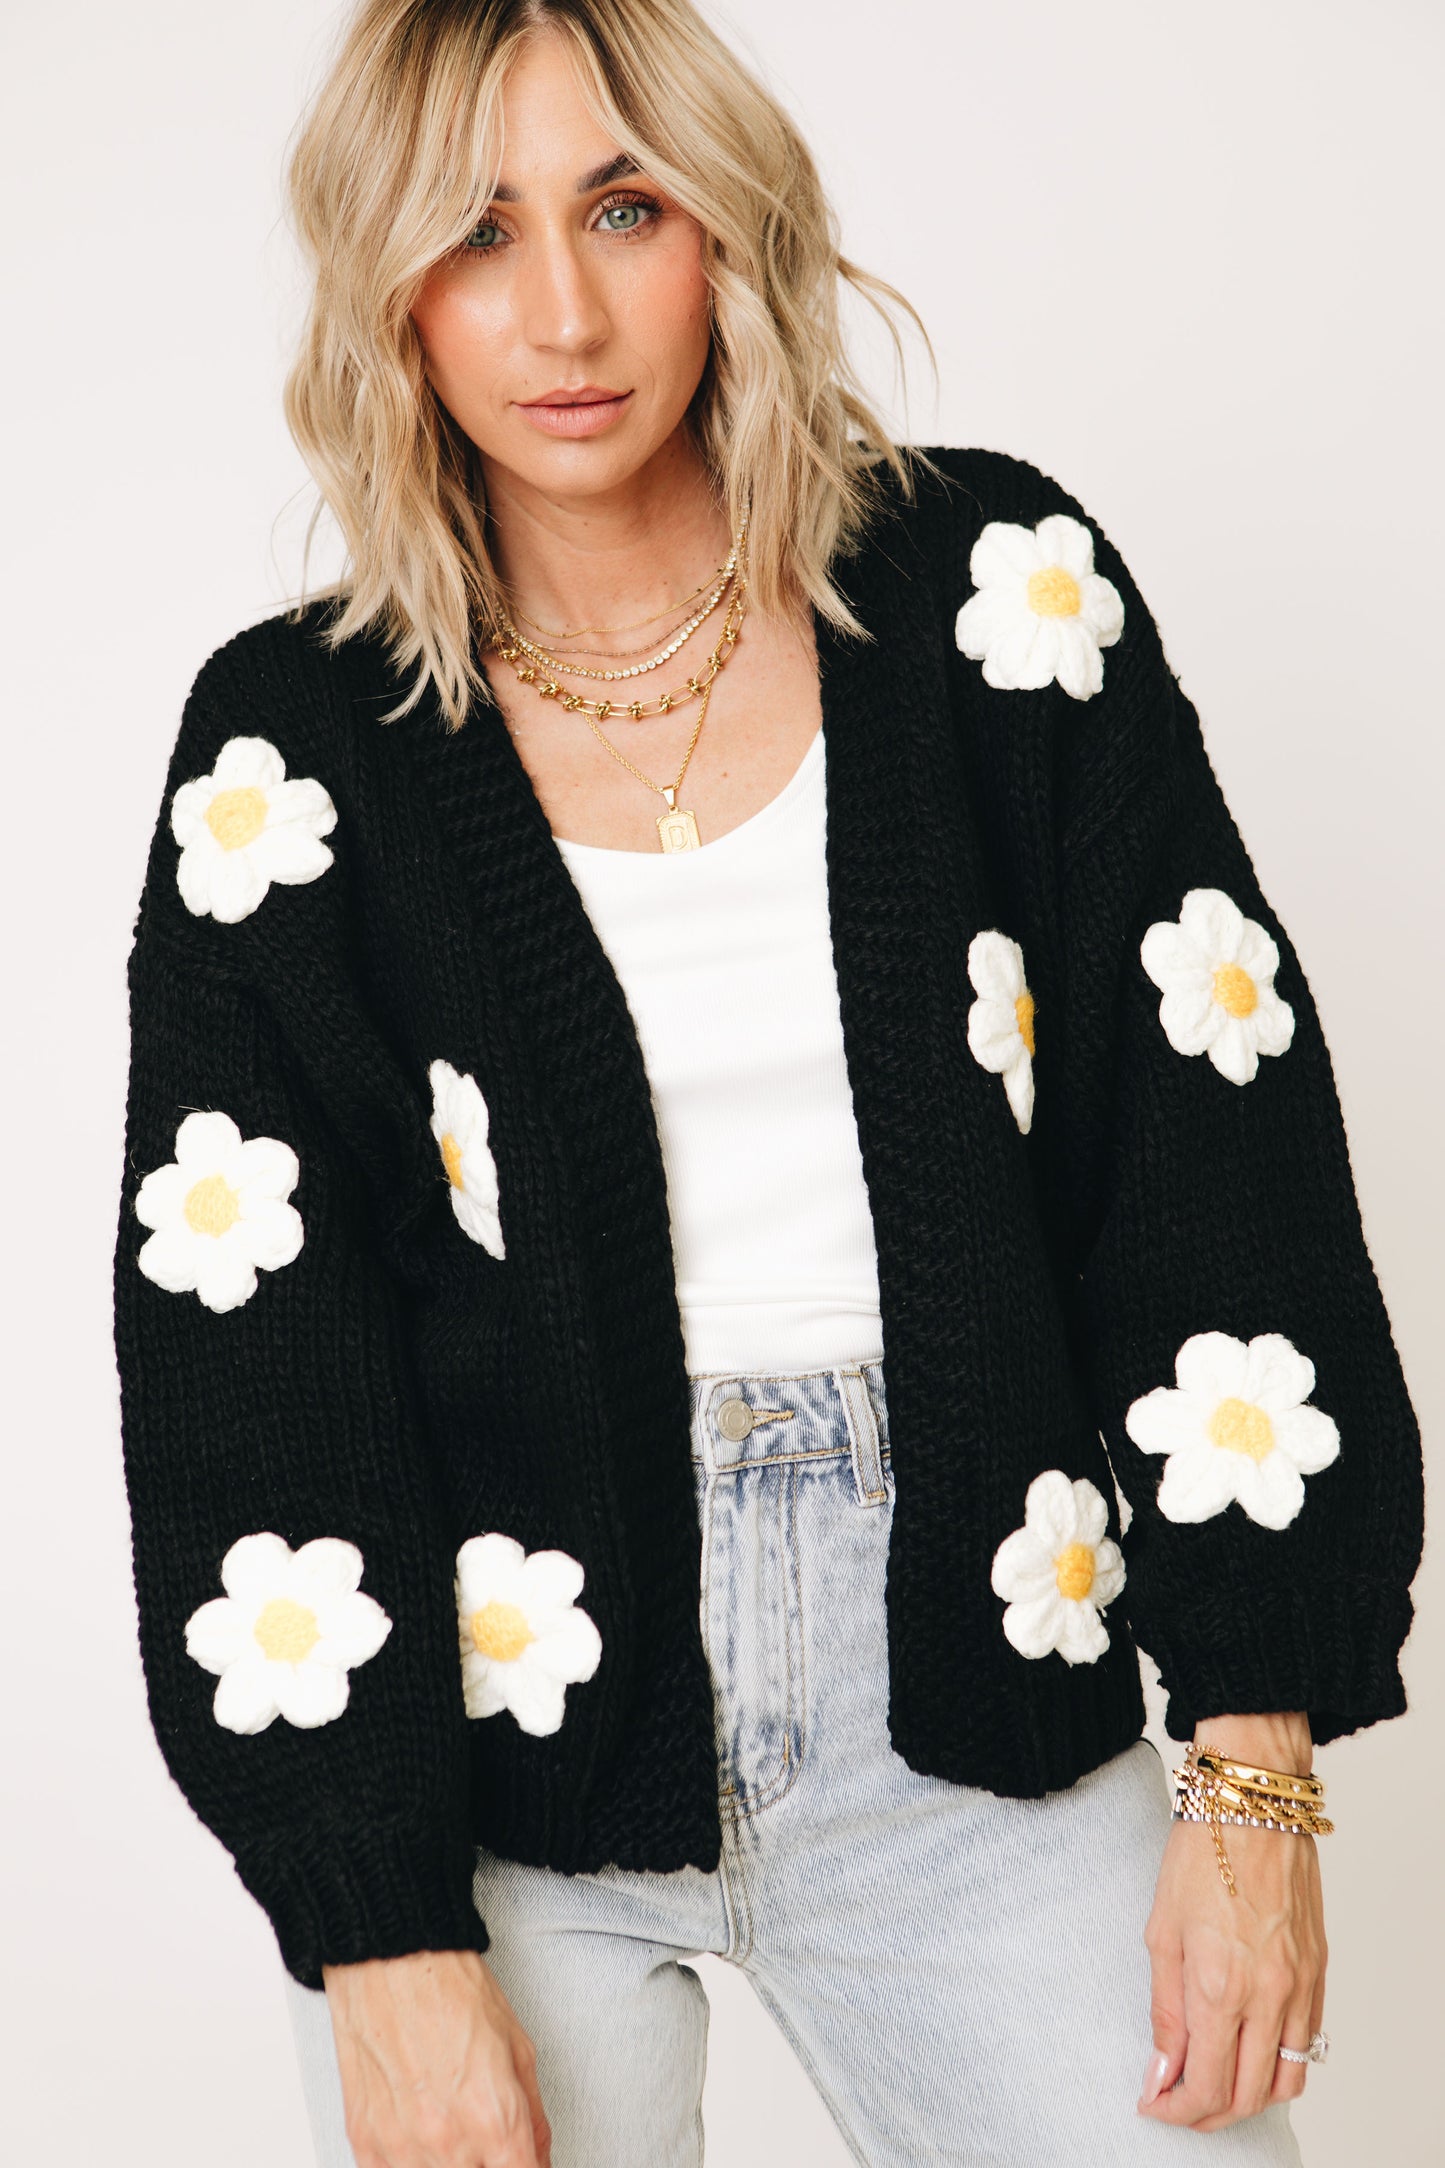 Pocket full Of Daisies Sweater Knit Cardigan (S-3XL)